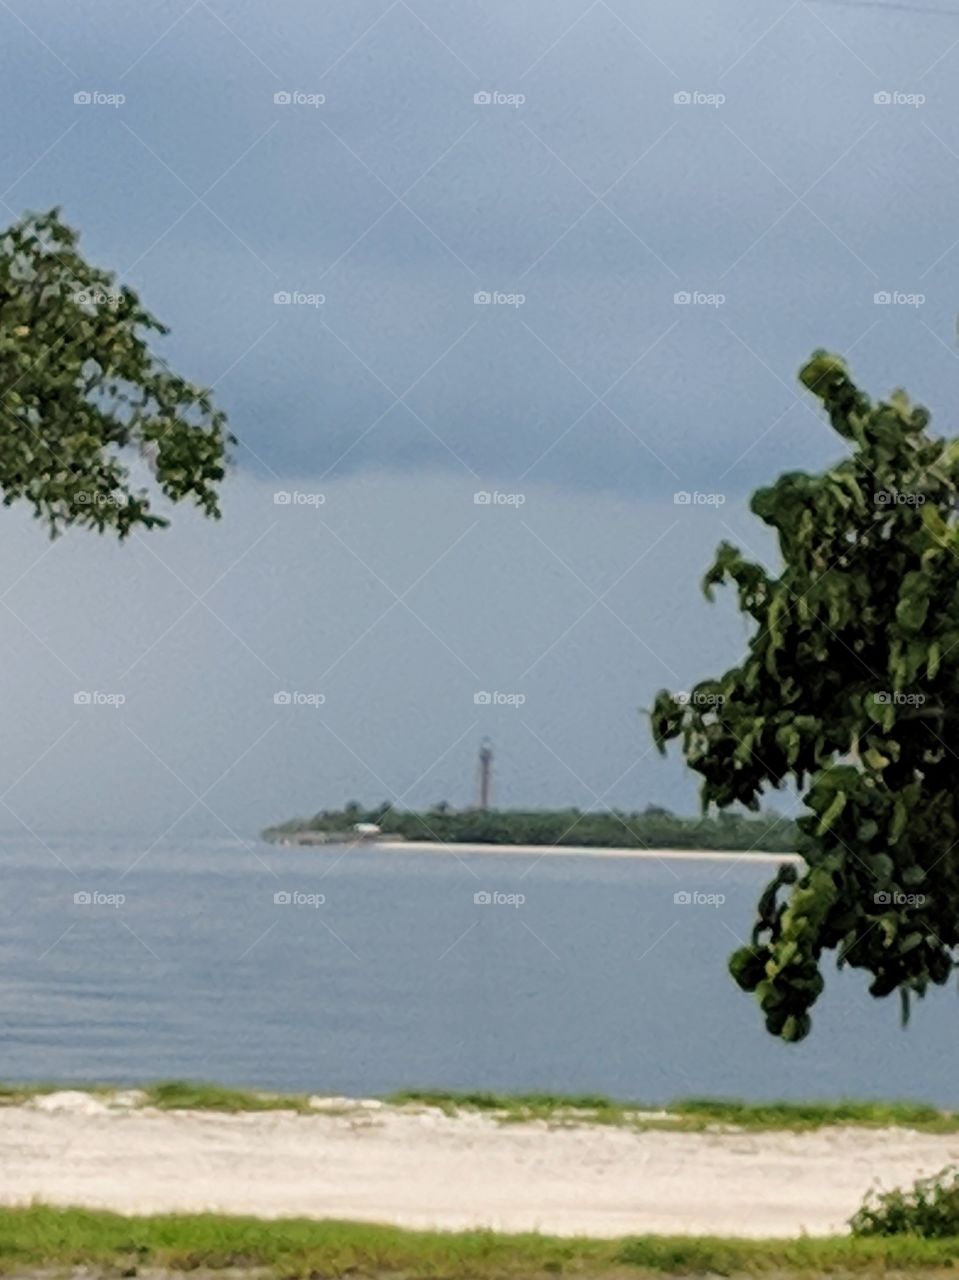 A storm rolls in over the Sanibel Island Lighthouse; photo taken from a pull off on the Sanibel causeway, FL.